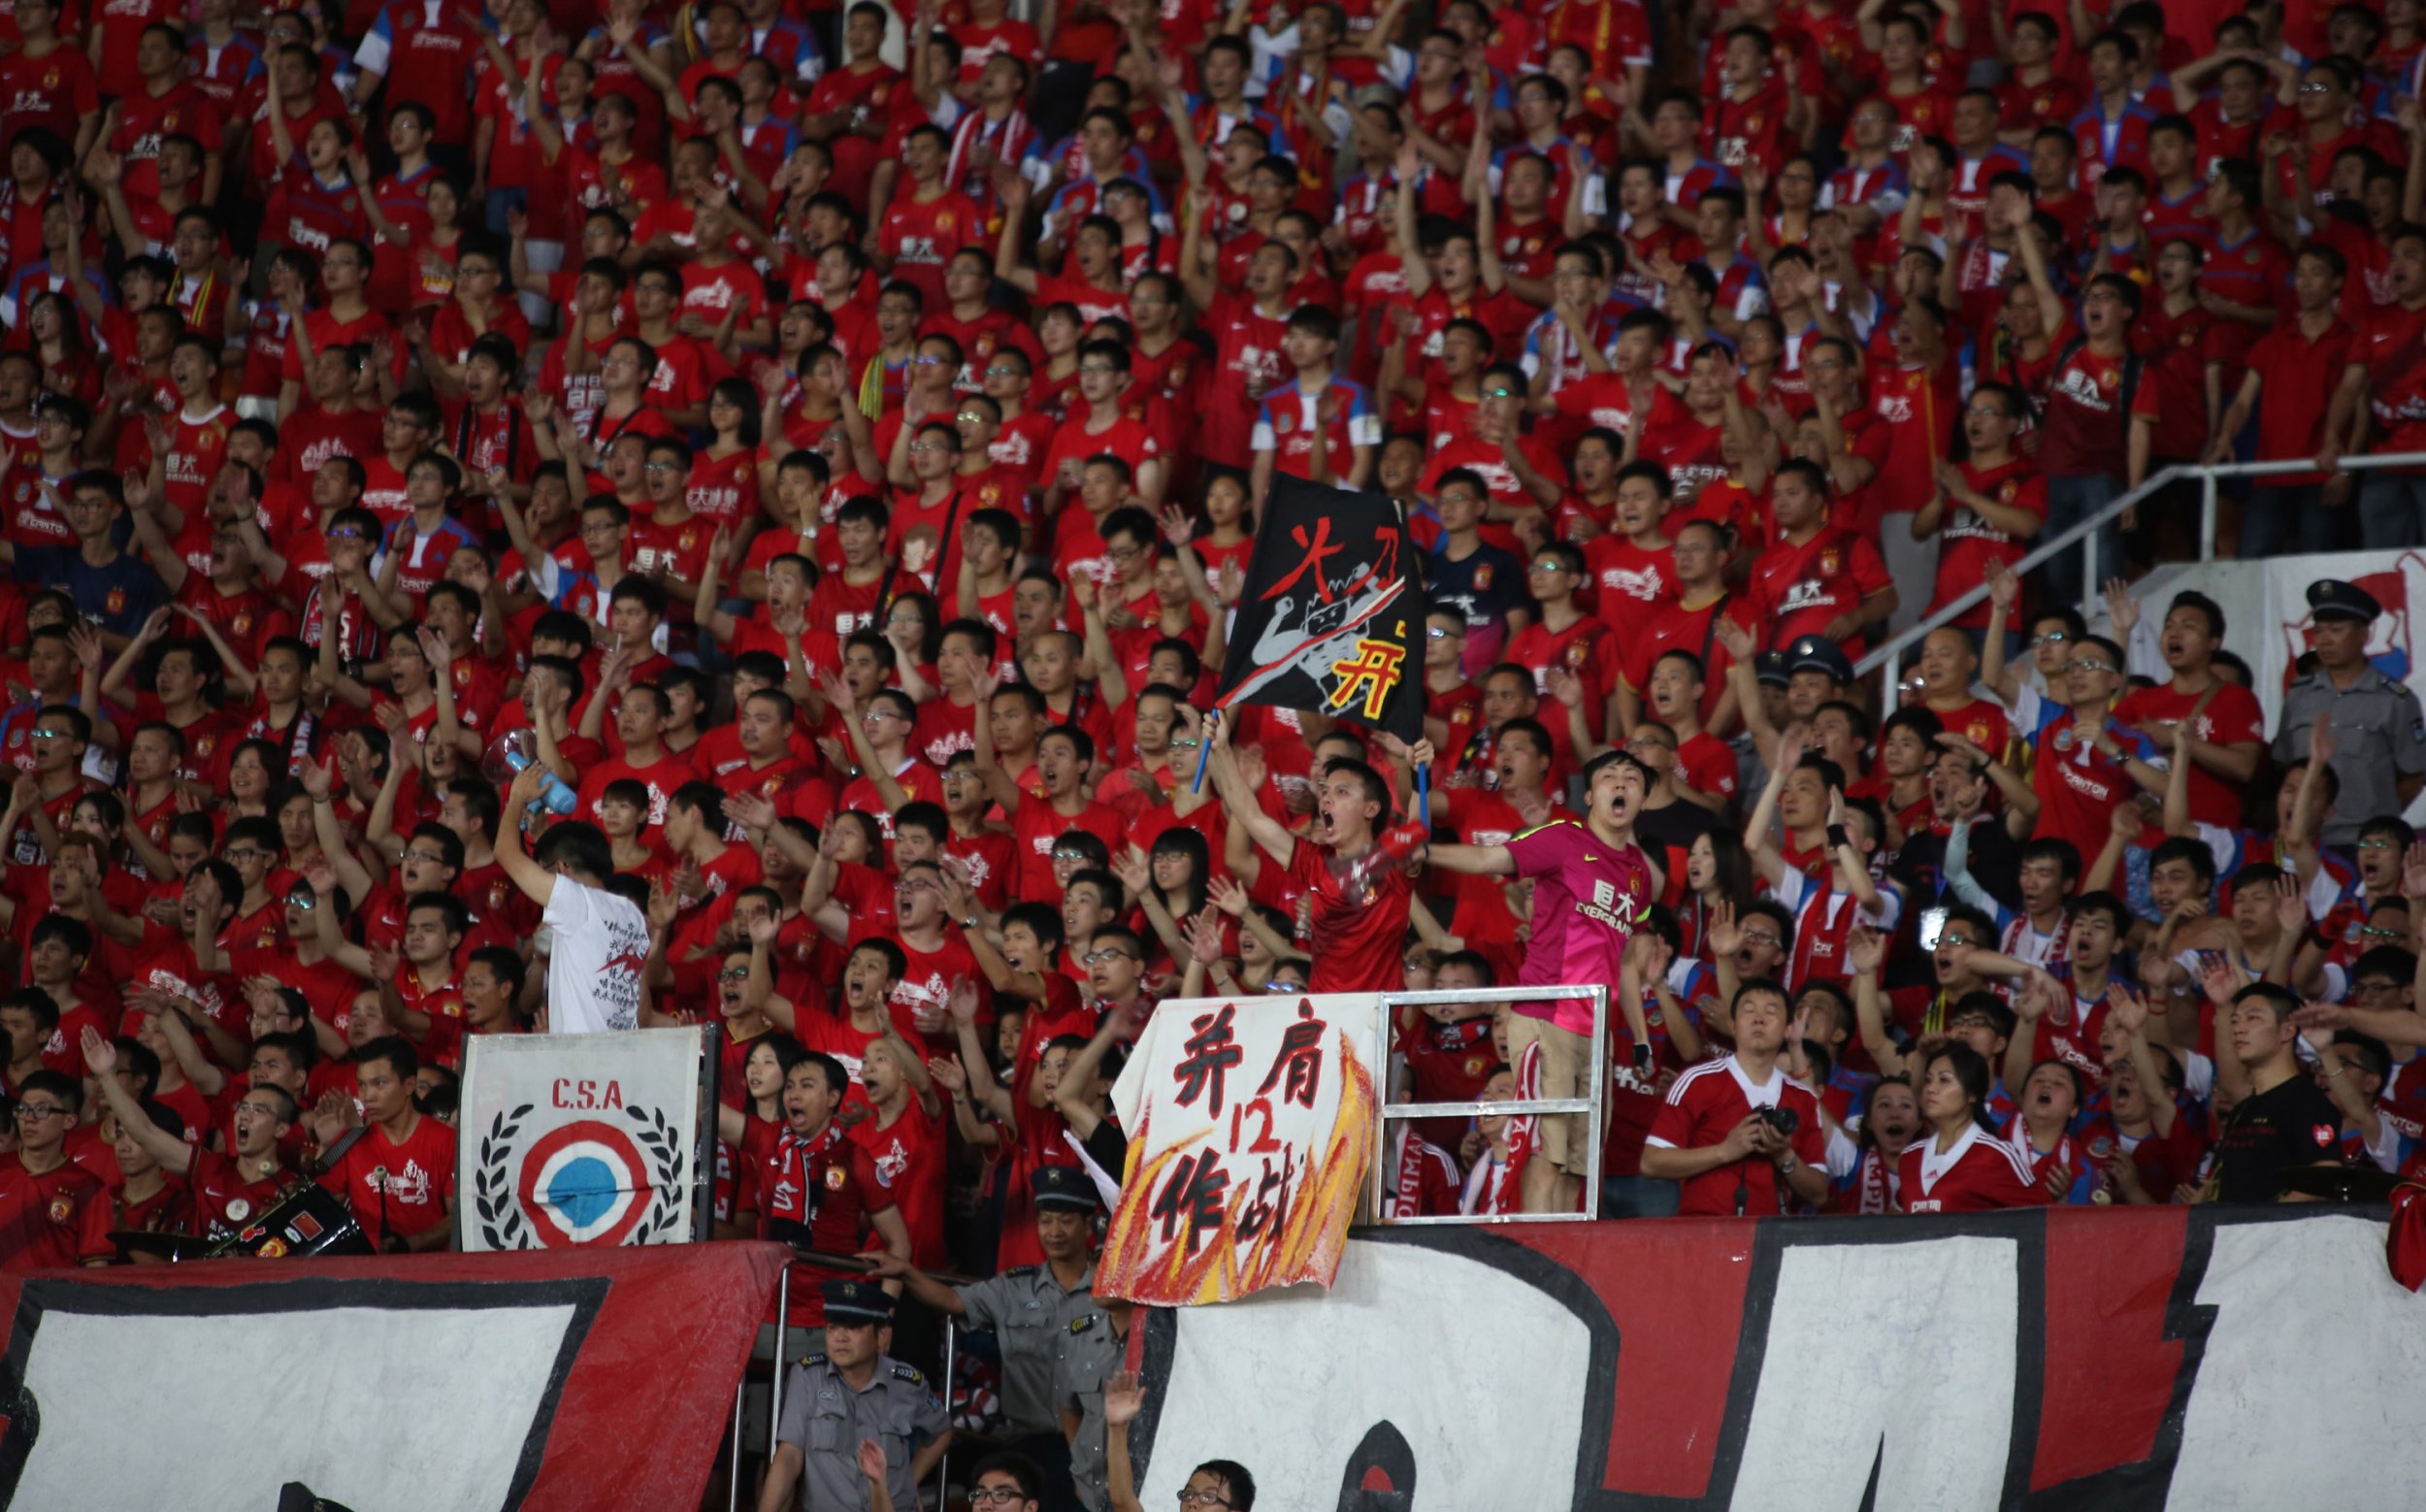 Guangzhou Evergrande fans during the Asian Champions League Quarter Final in August 2014.